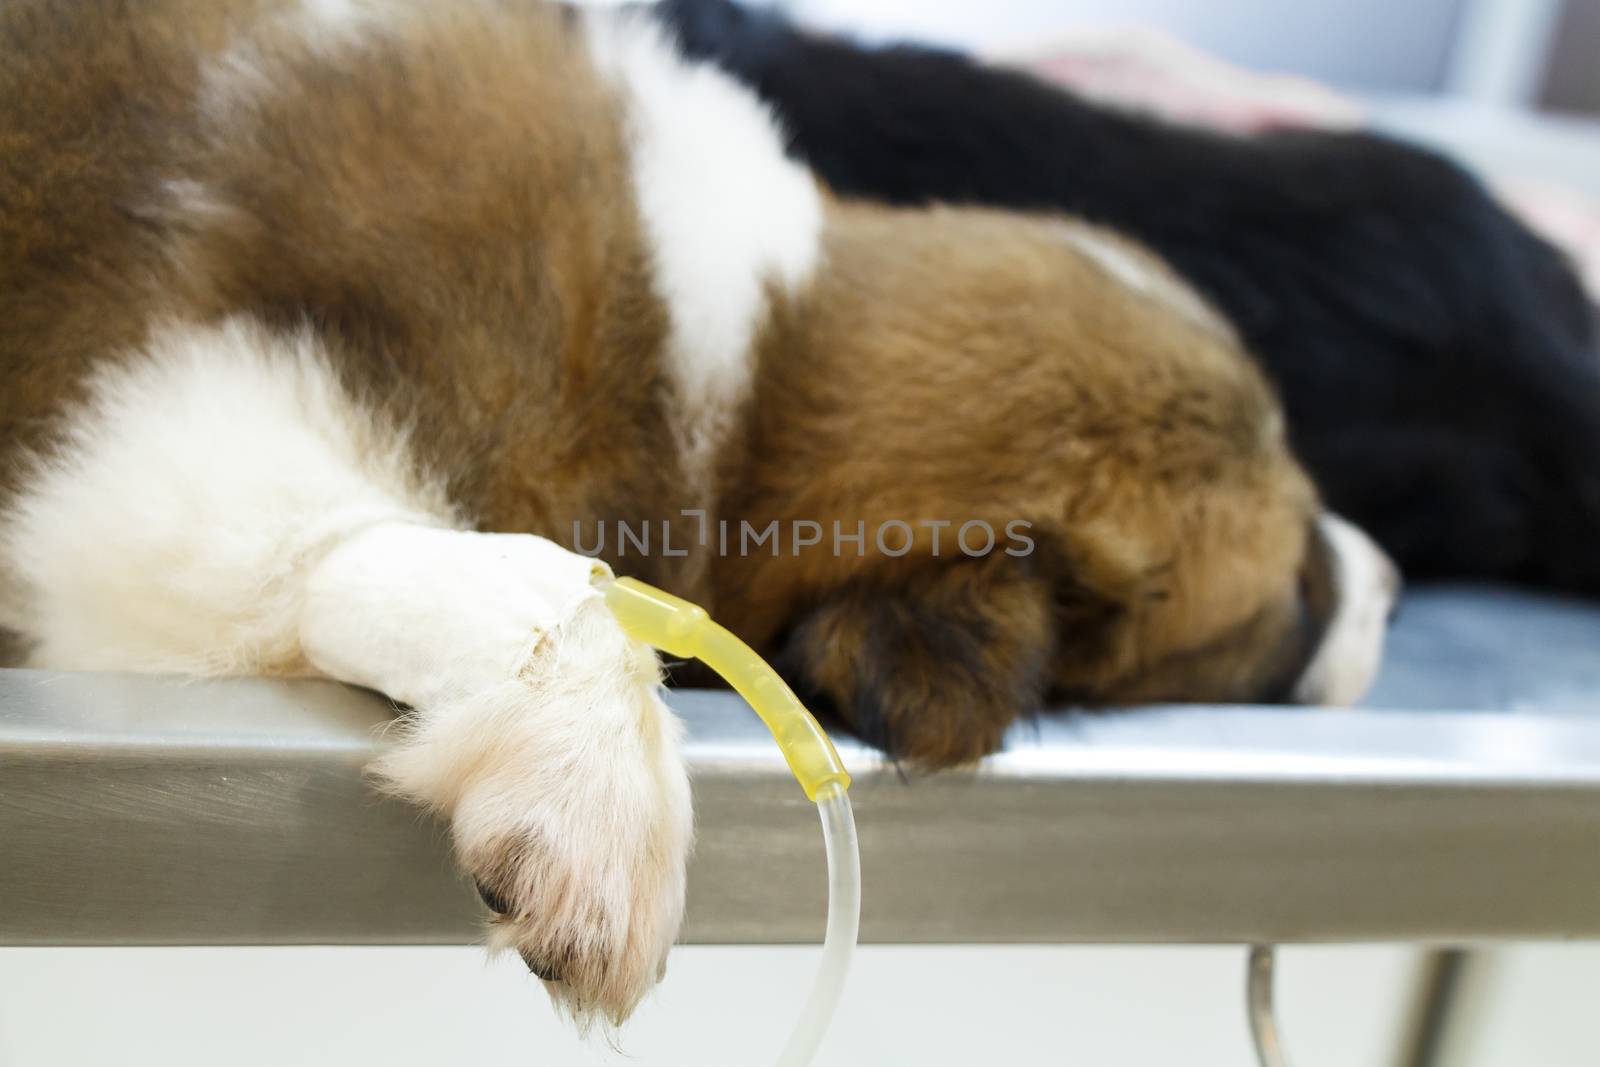 illness puppy ( Thai bangkaew dog ) with intravenous drip on operating table in veterinarian's clinic